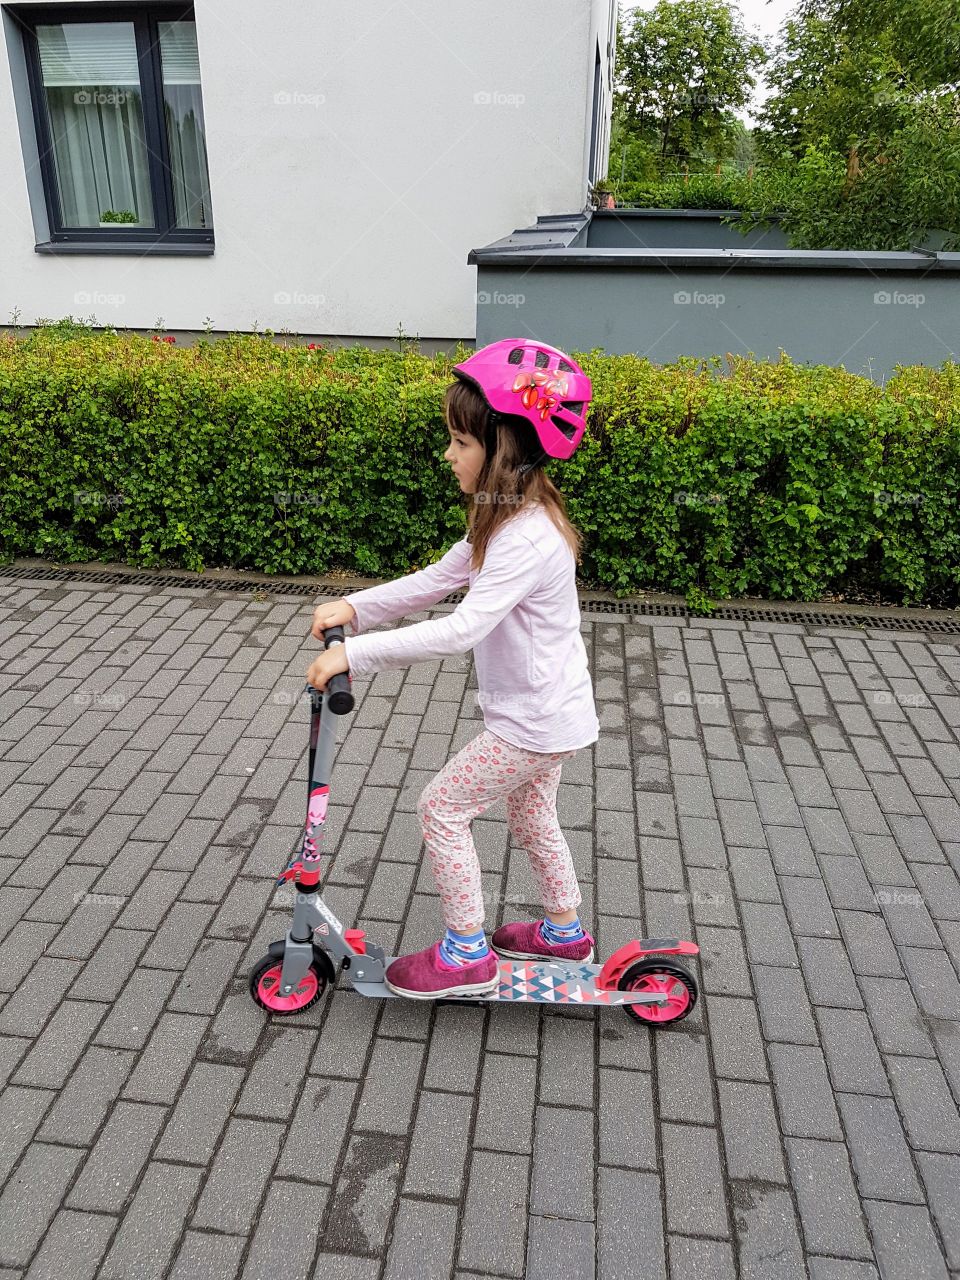 Little girl riding on scooter